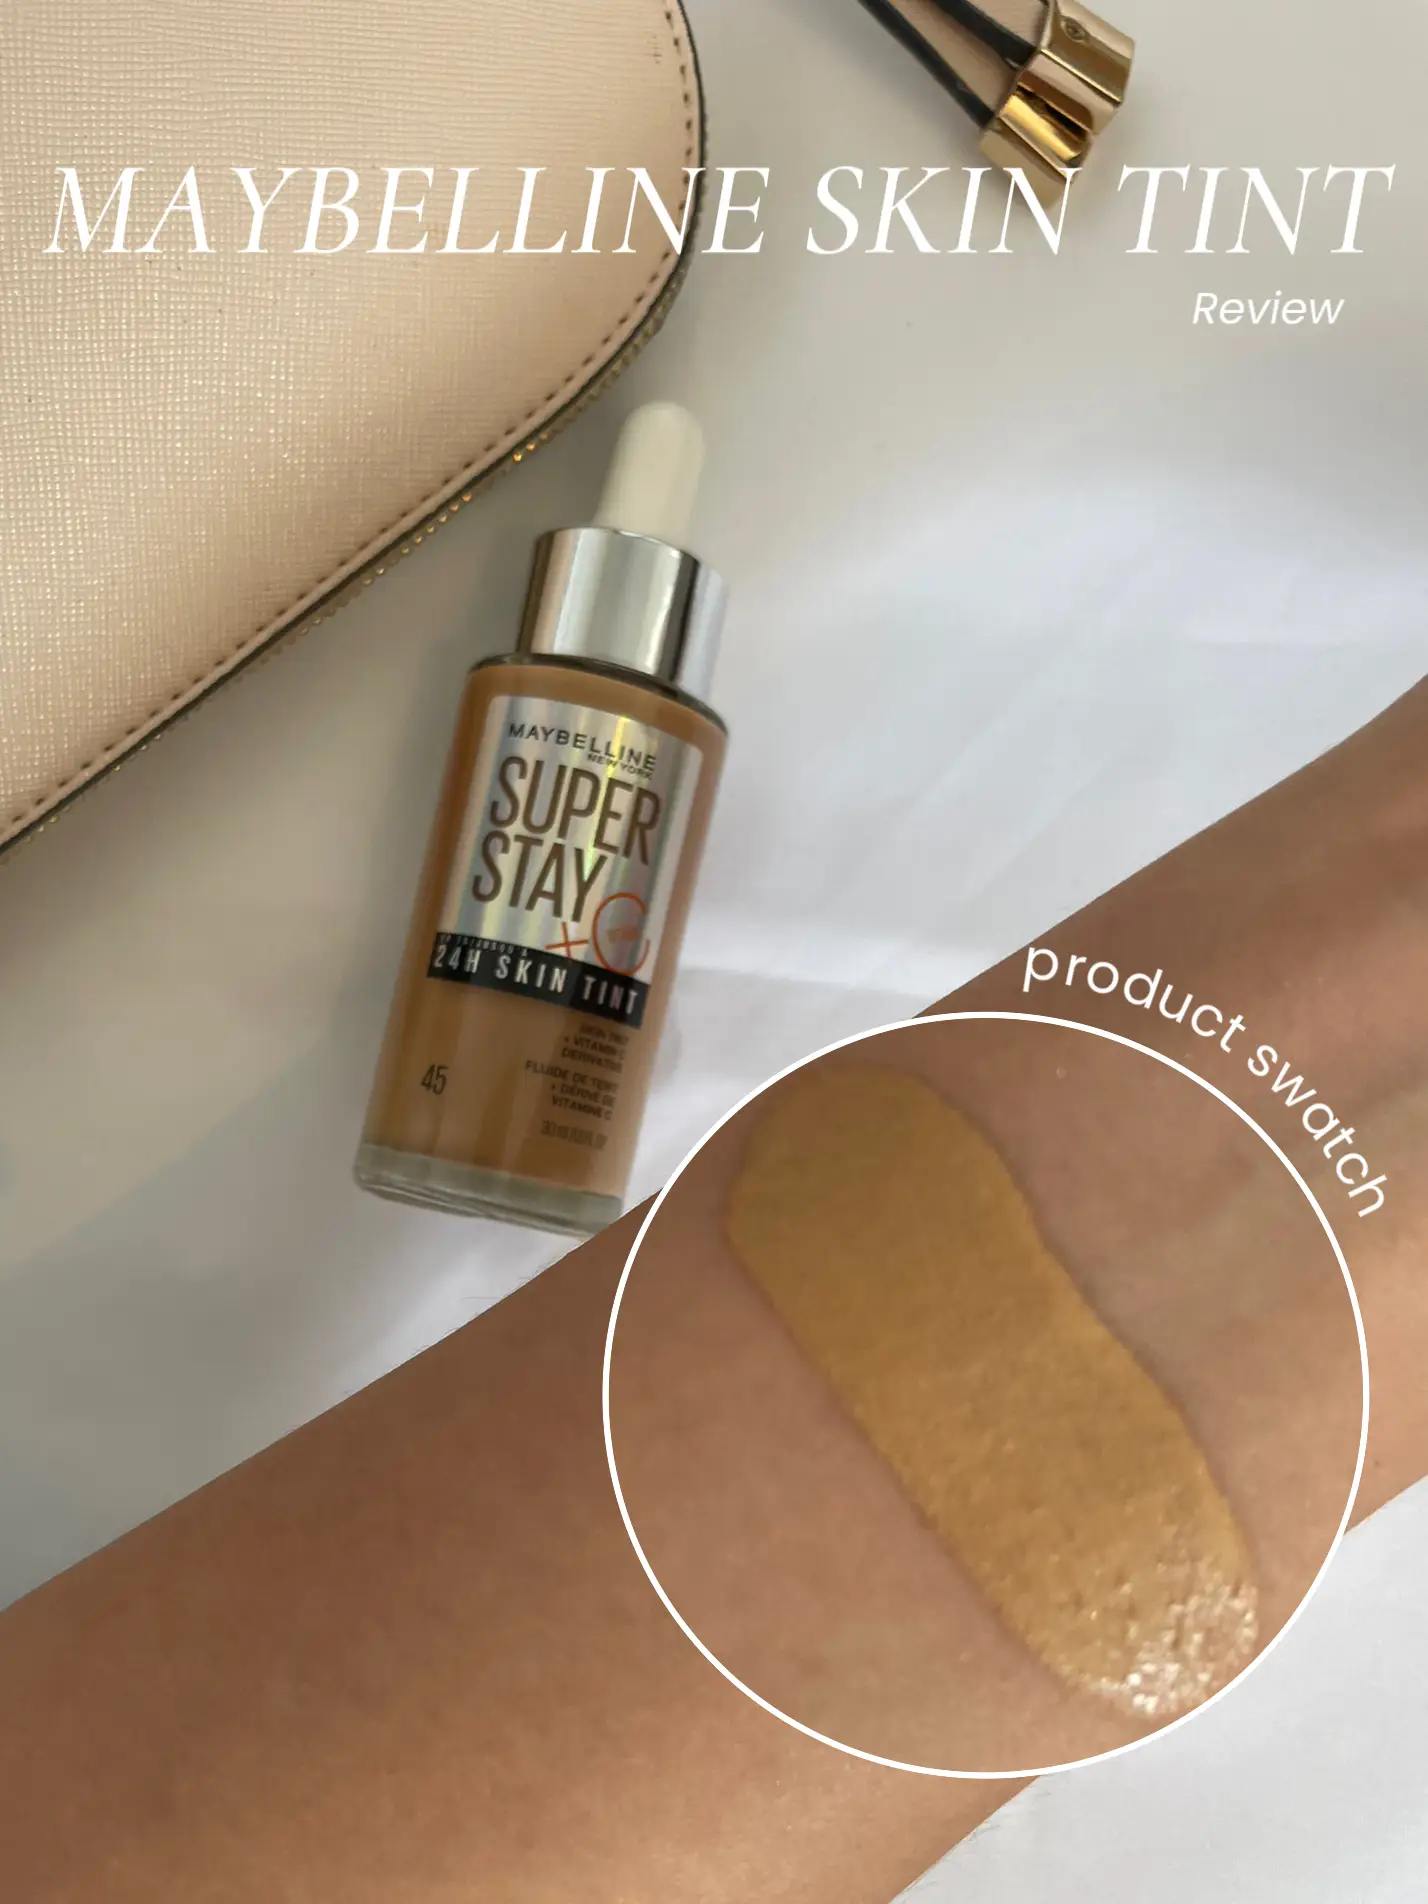 Maybelline Skin Tint review 💫  Gallery posted by Shannon Foster